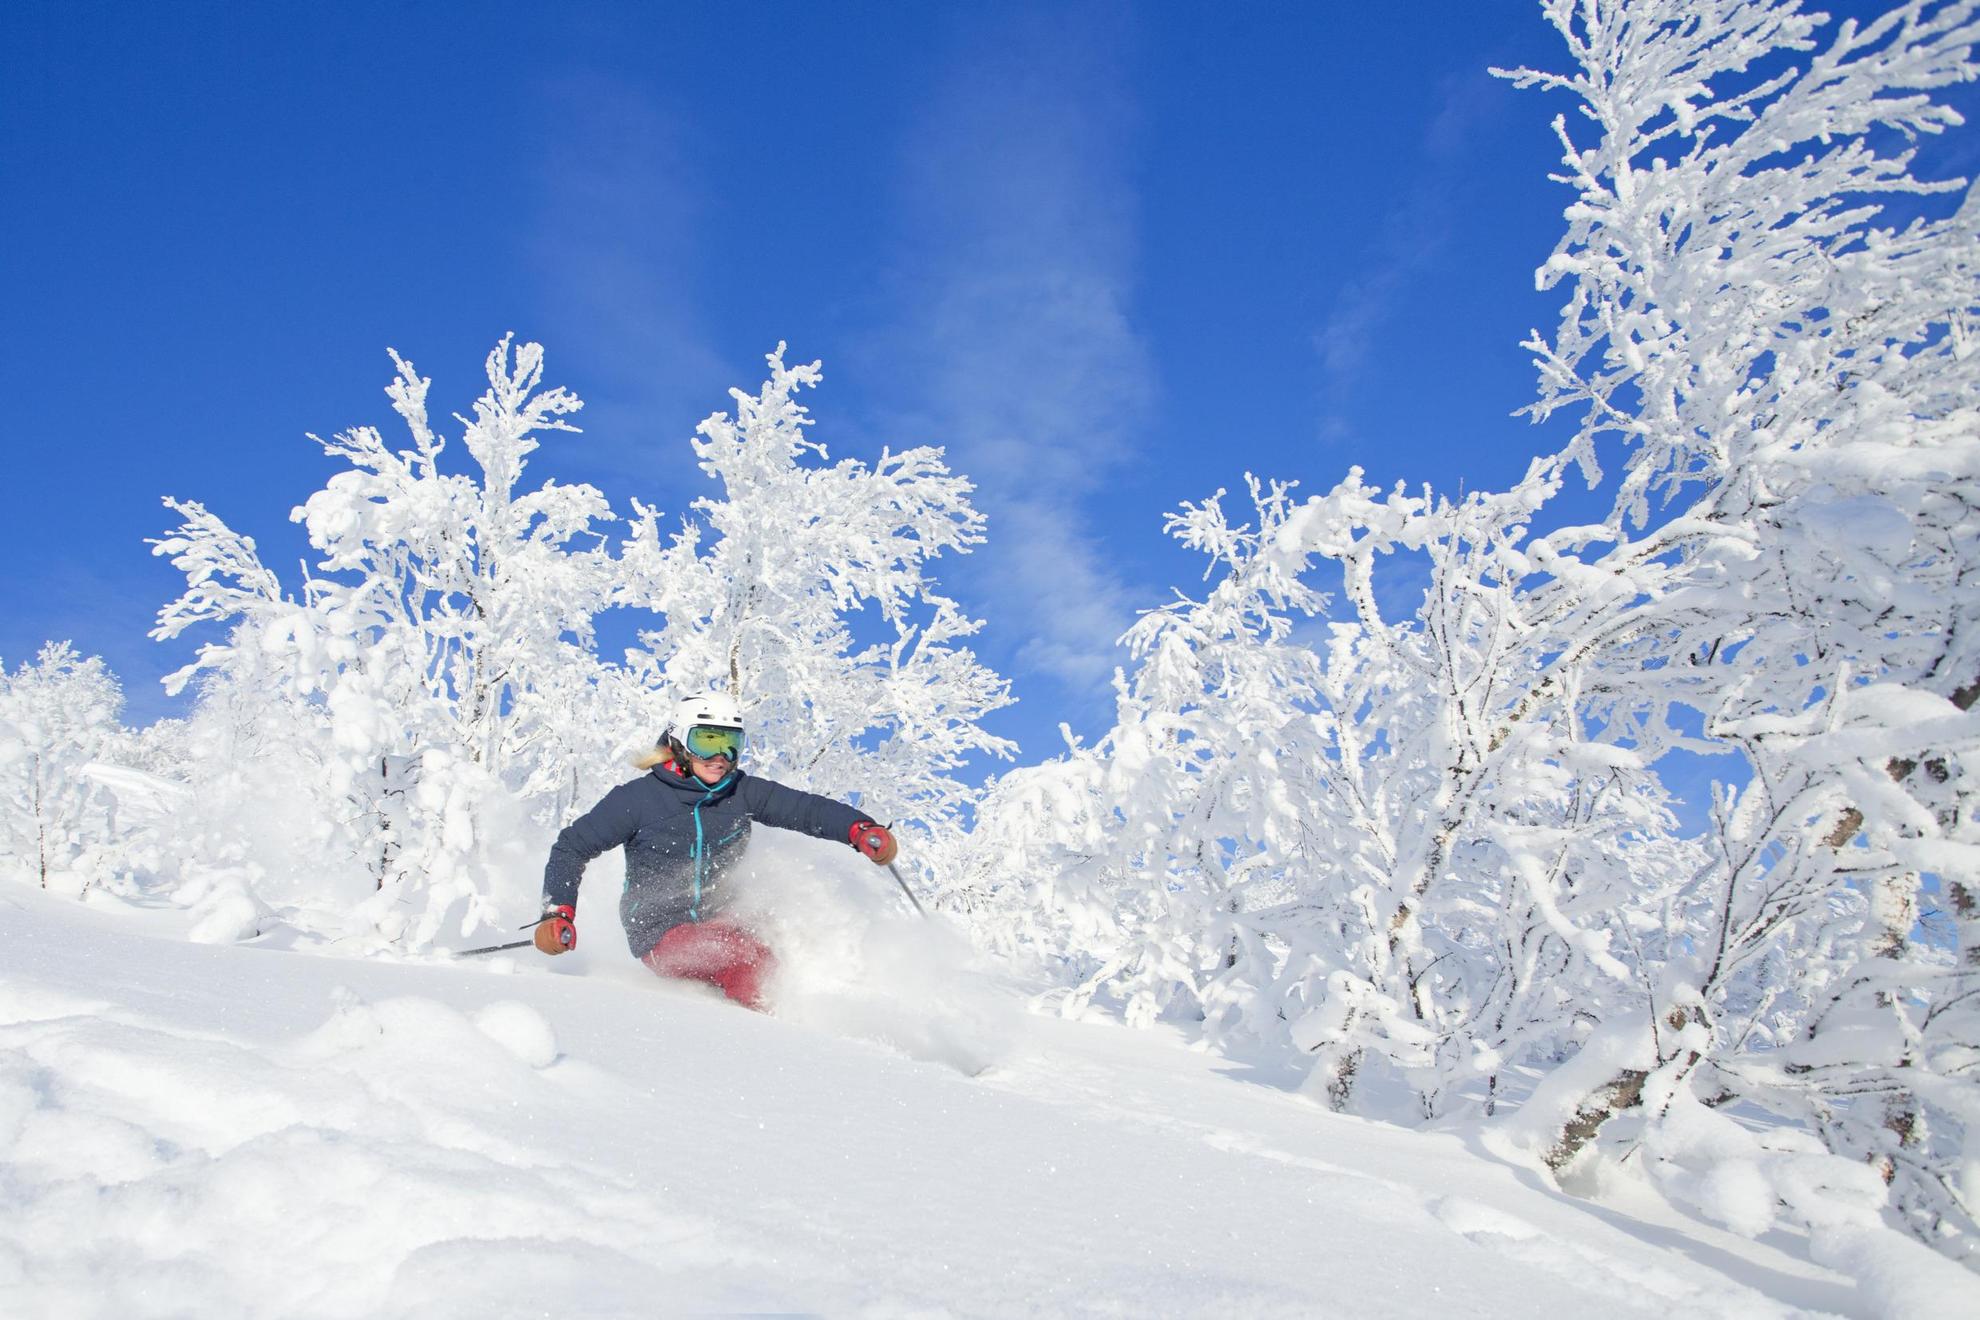 A woman is skiing off-piste. The ground and trees are covered in snow and the sky is blue.